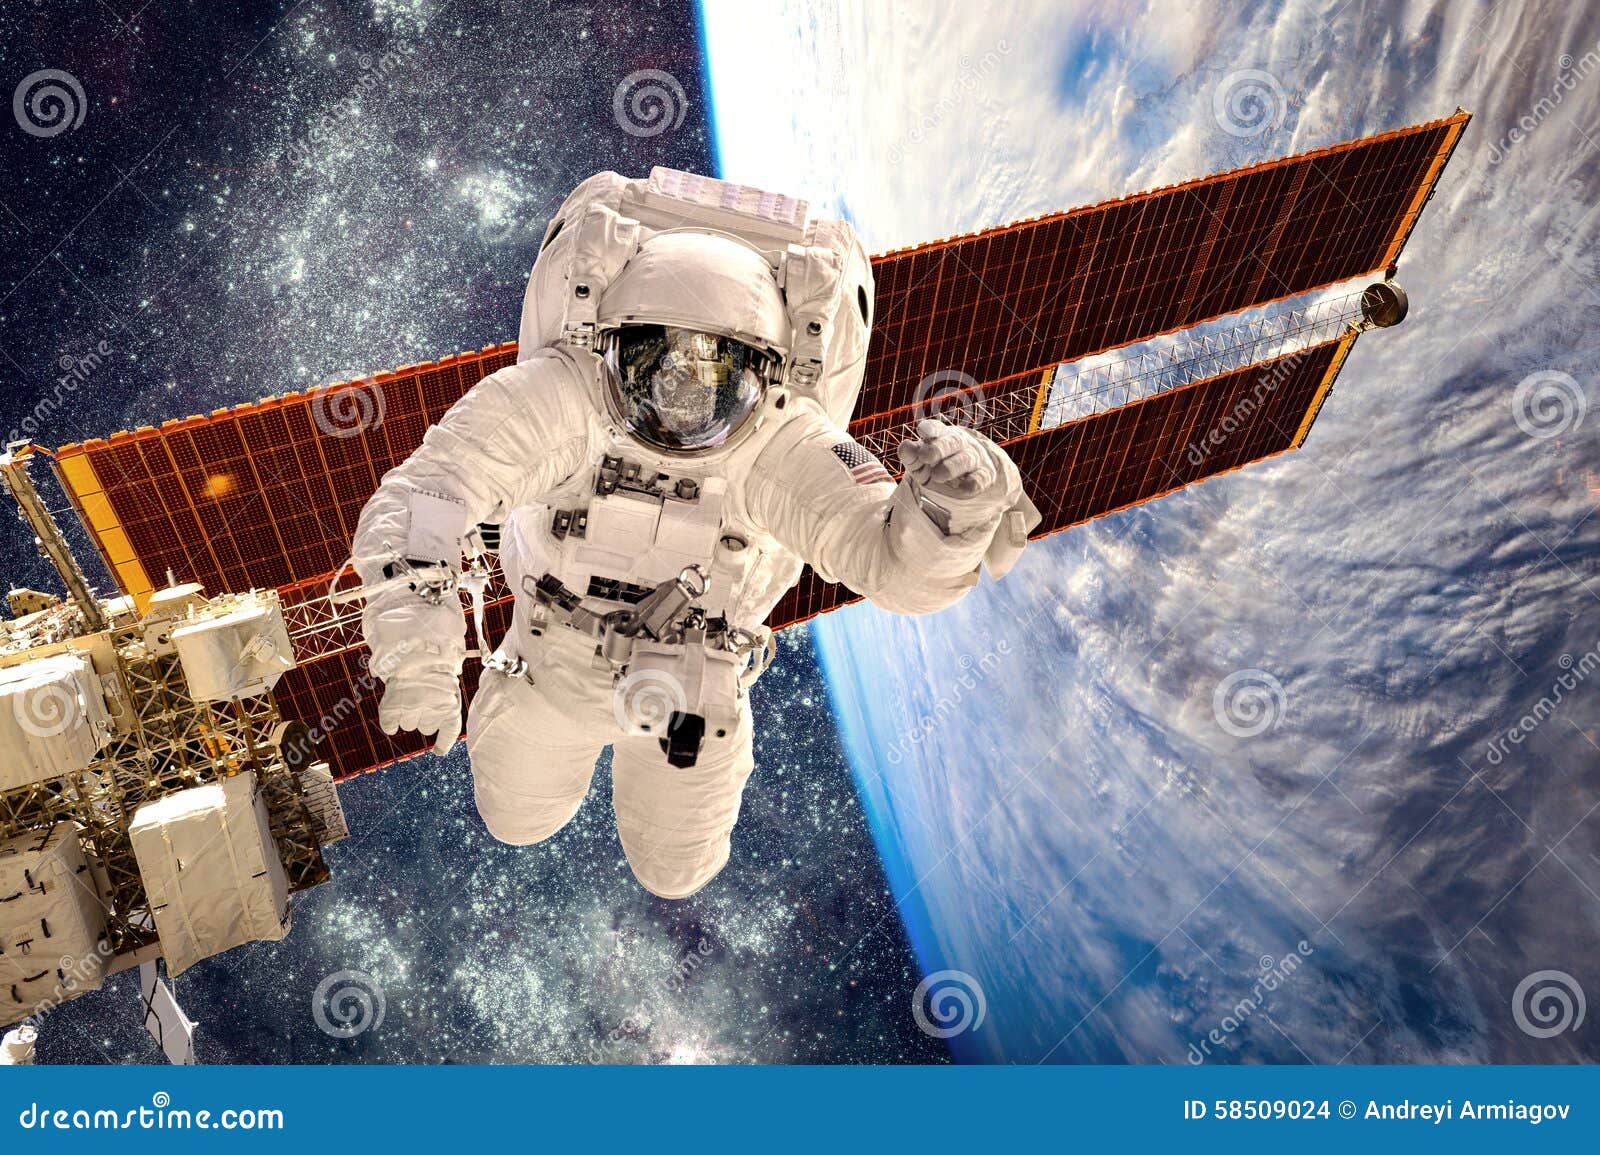 international space station and astronaut.